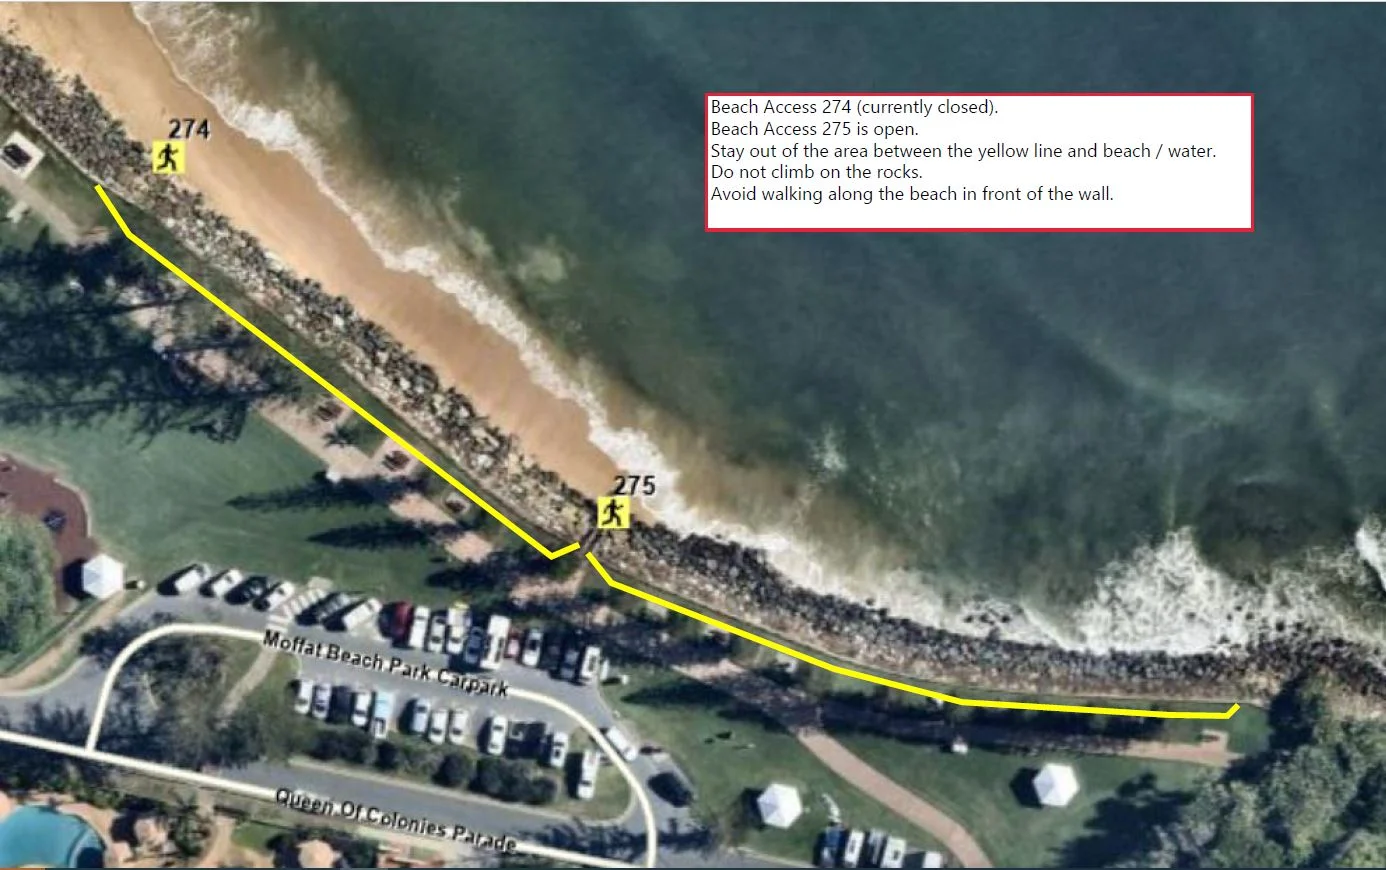 Stay behind the yellow line when visiting Moffat Beach.